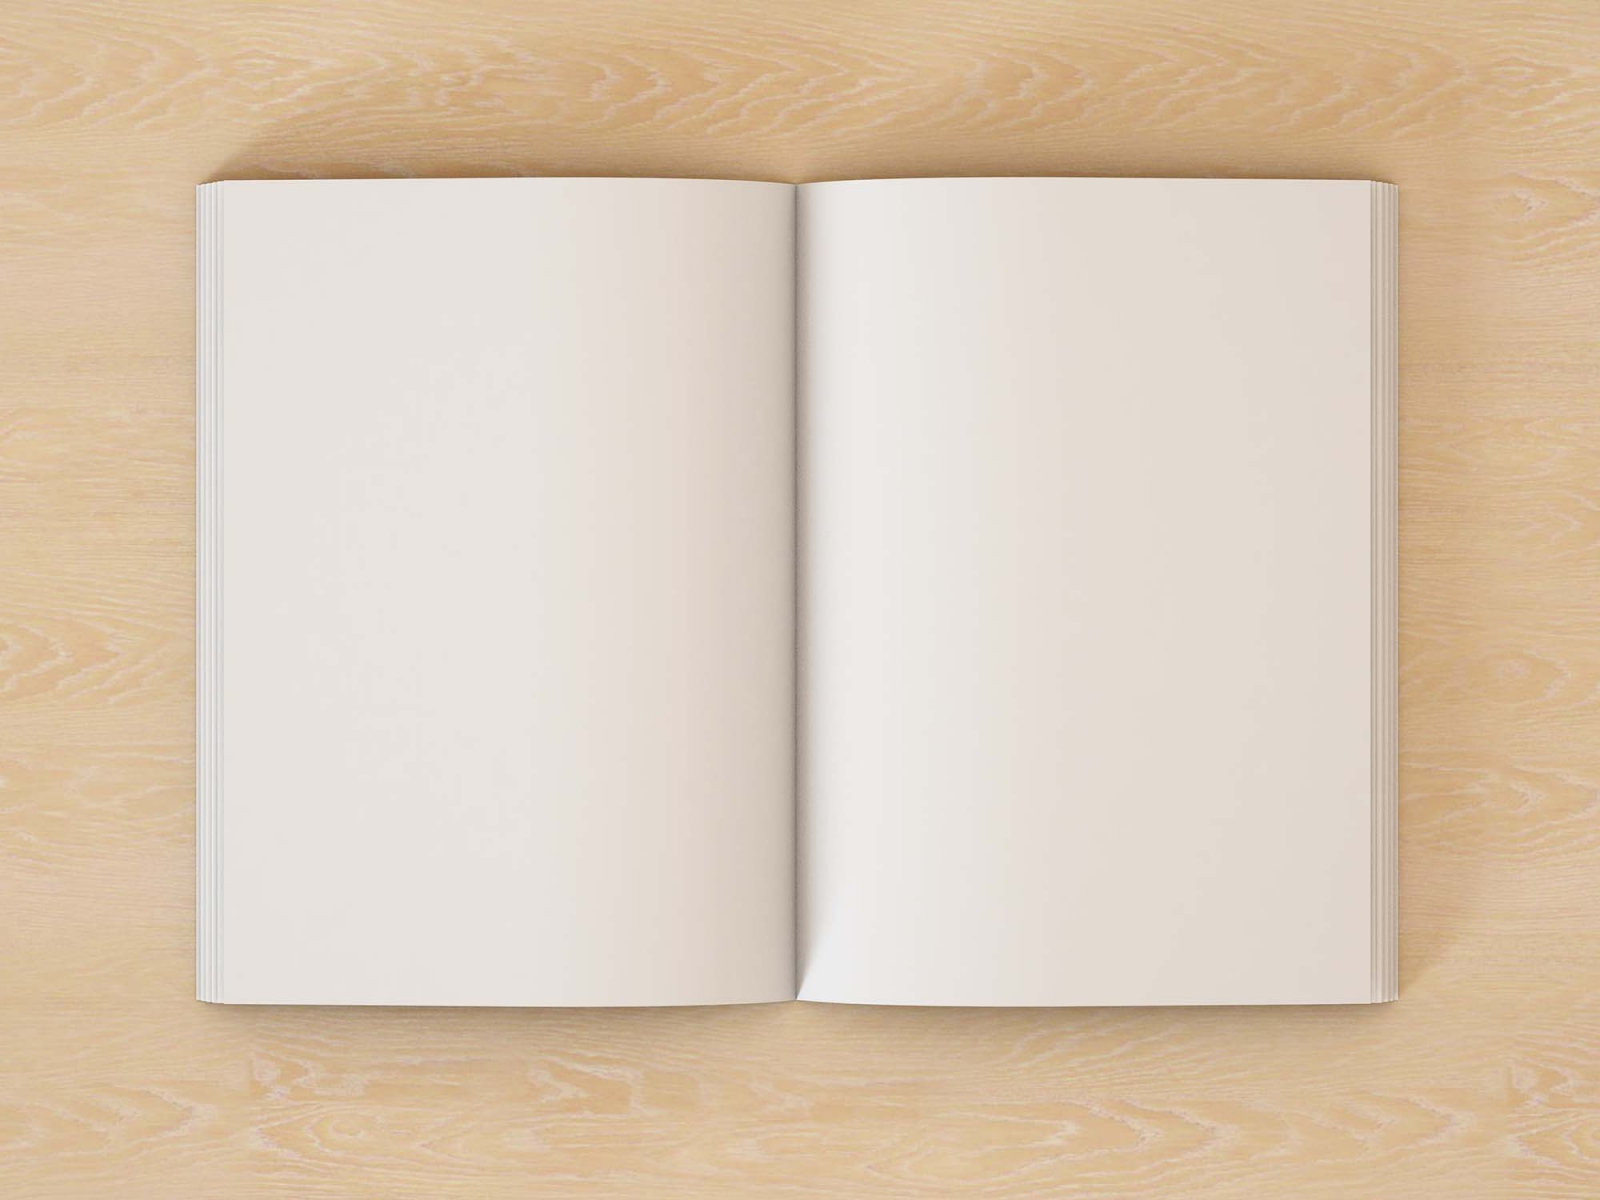 An open book page mockup laid flat on a wooden surface, offering a clean slate for thoughts, sketches, or writings.